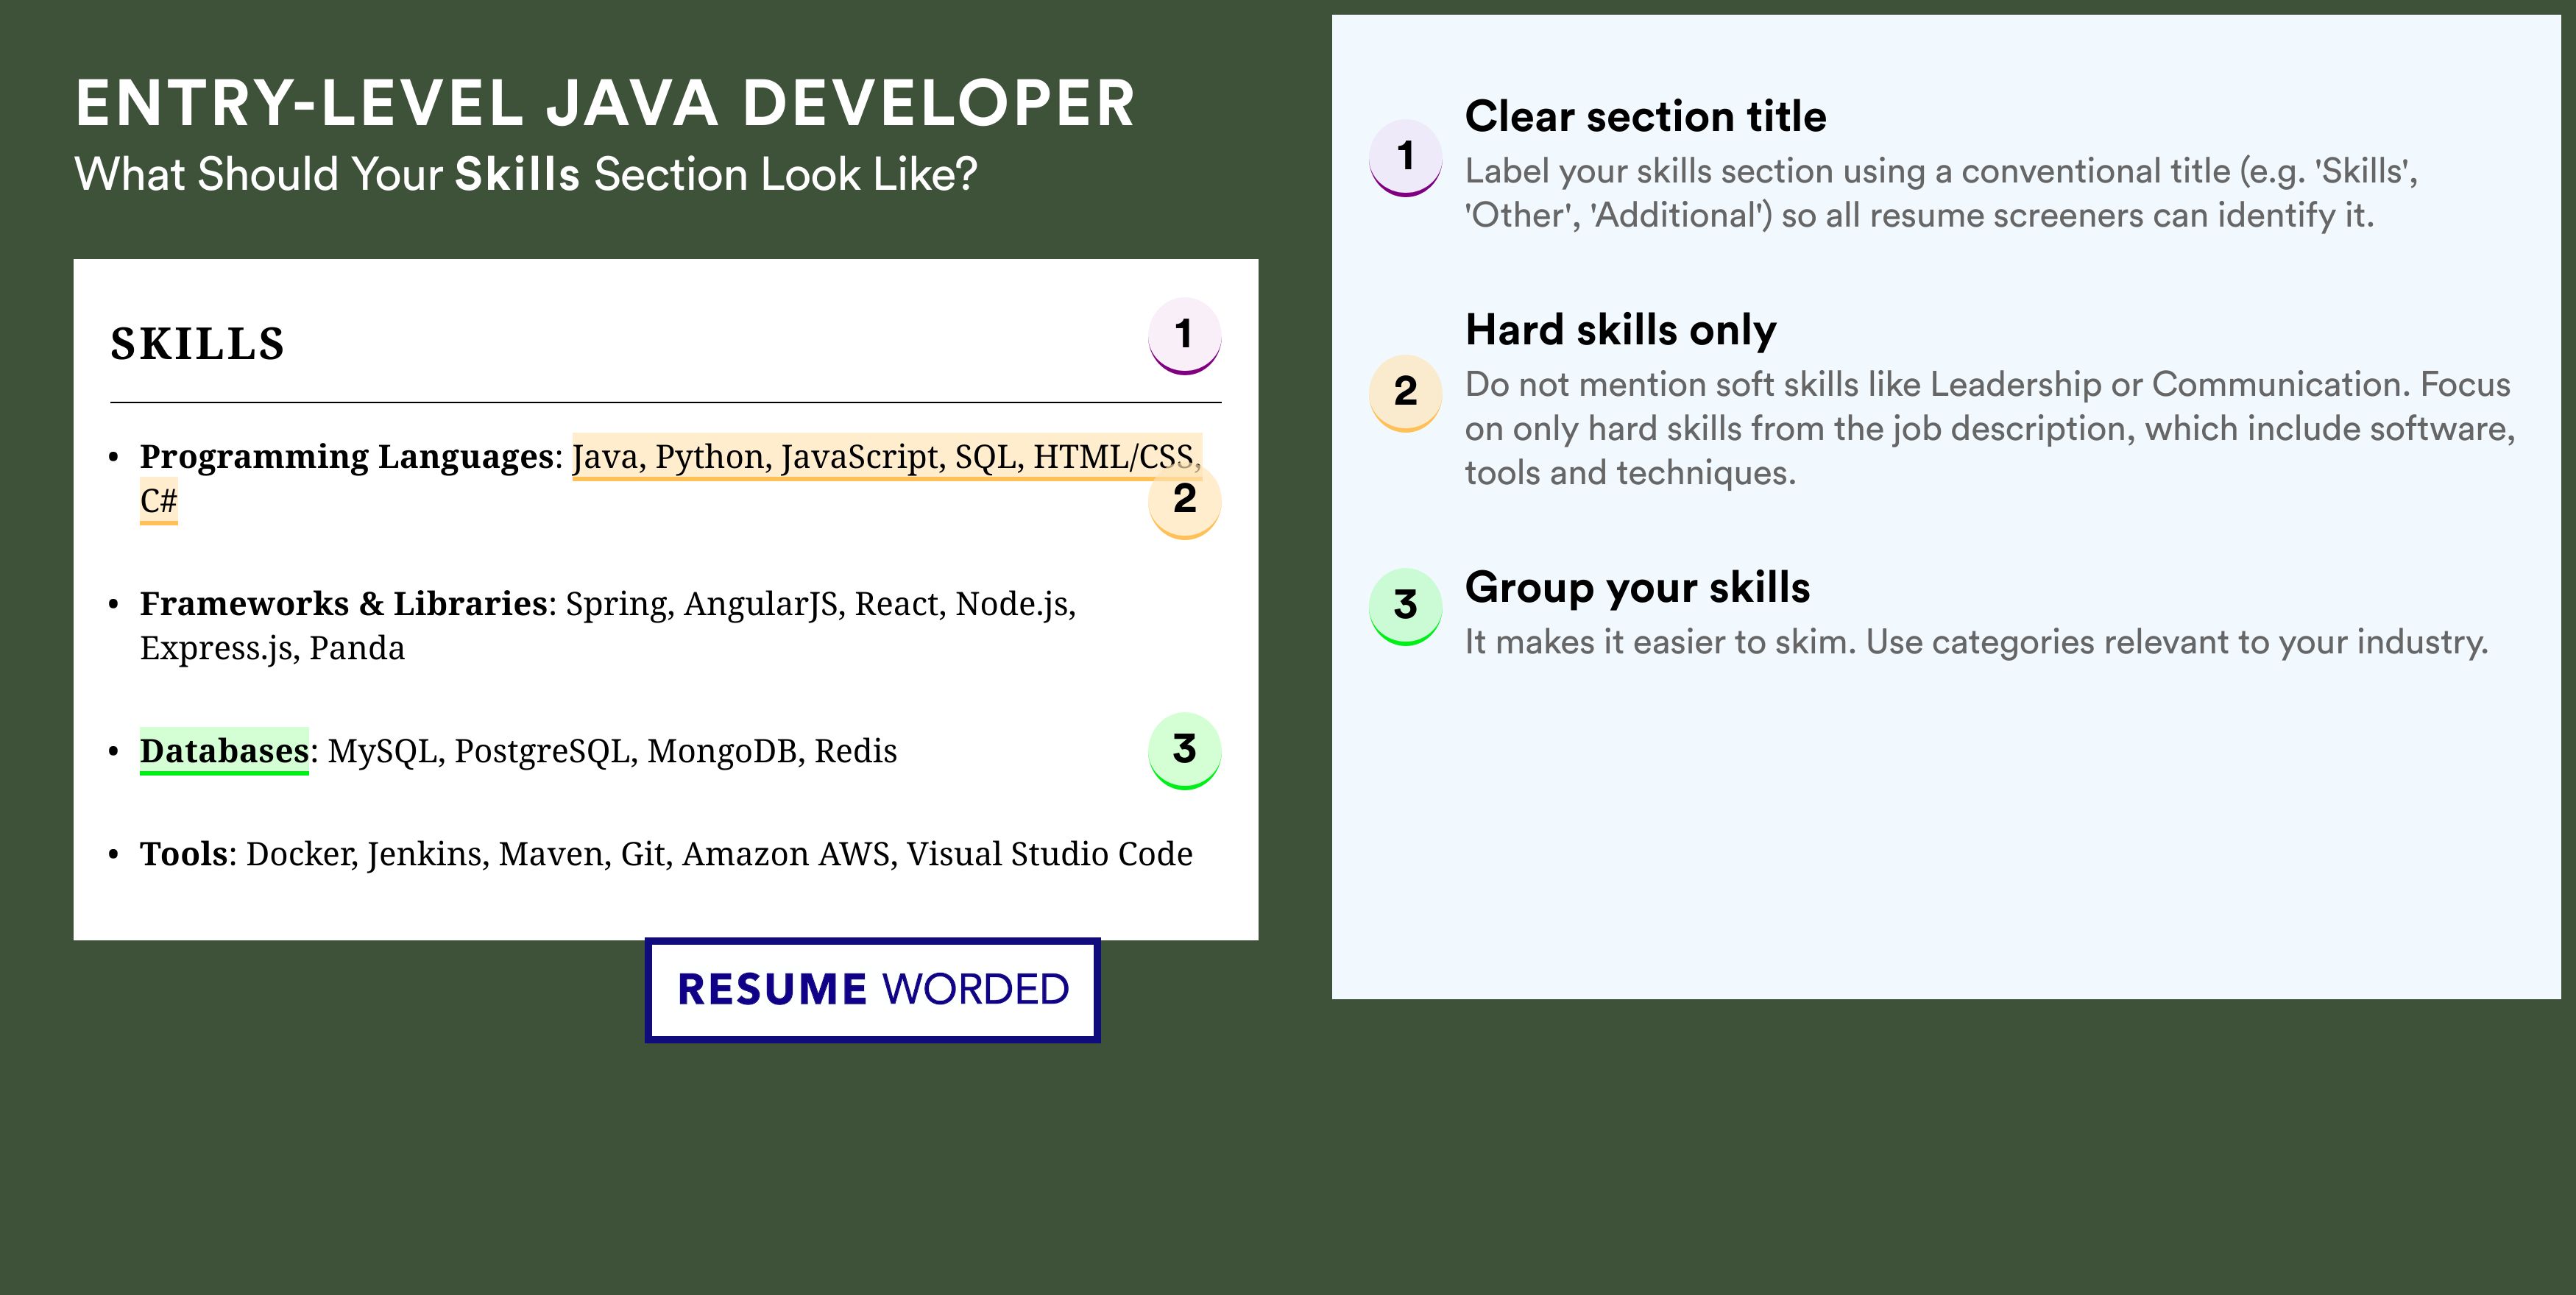 How To Write Your Skills Section - Entry-Level Java Developer Roles